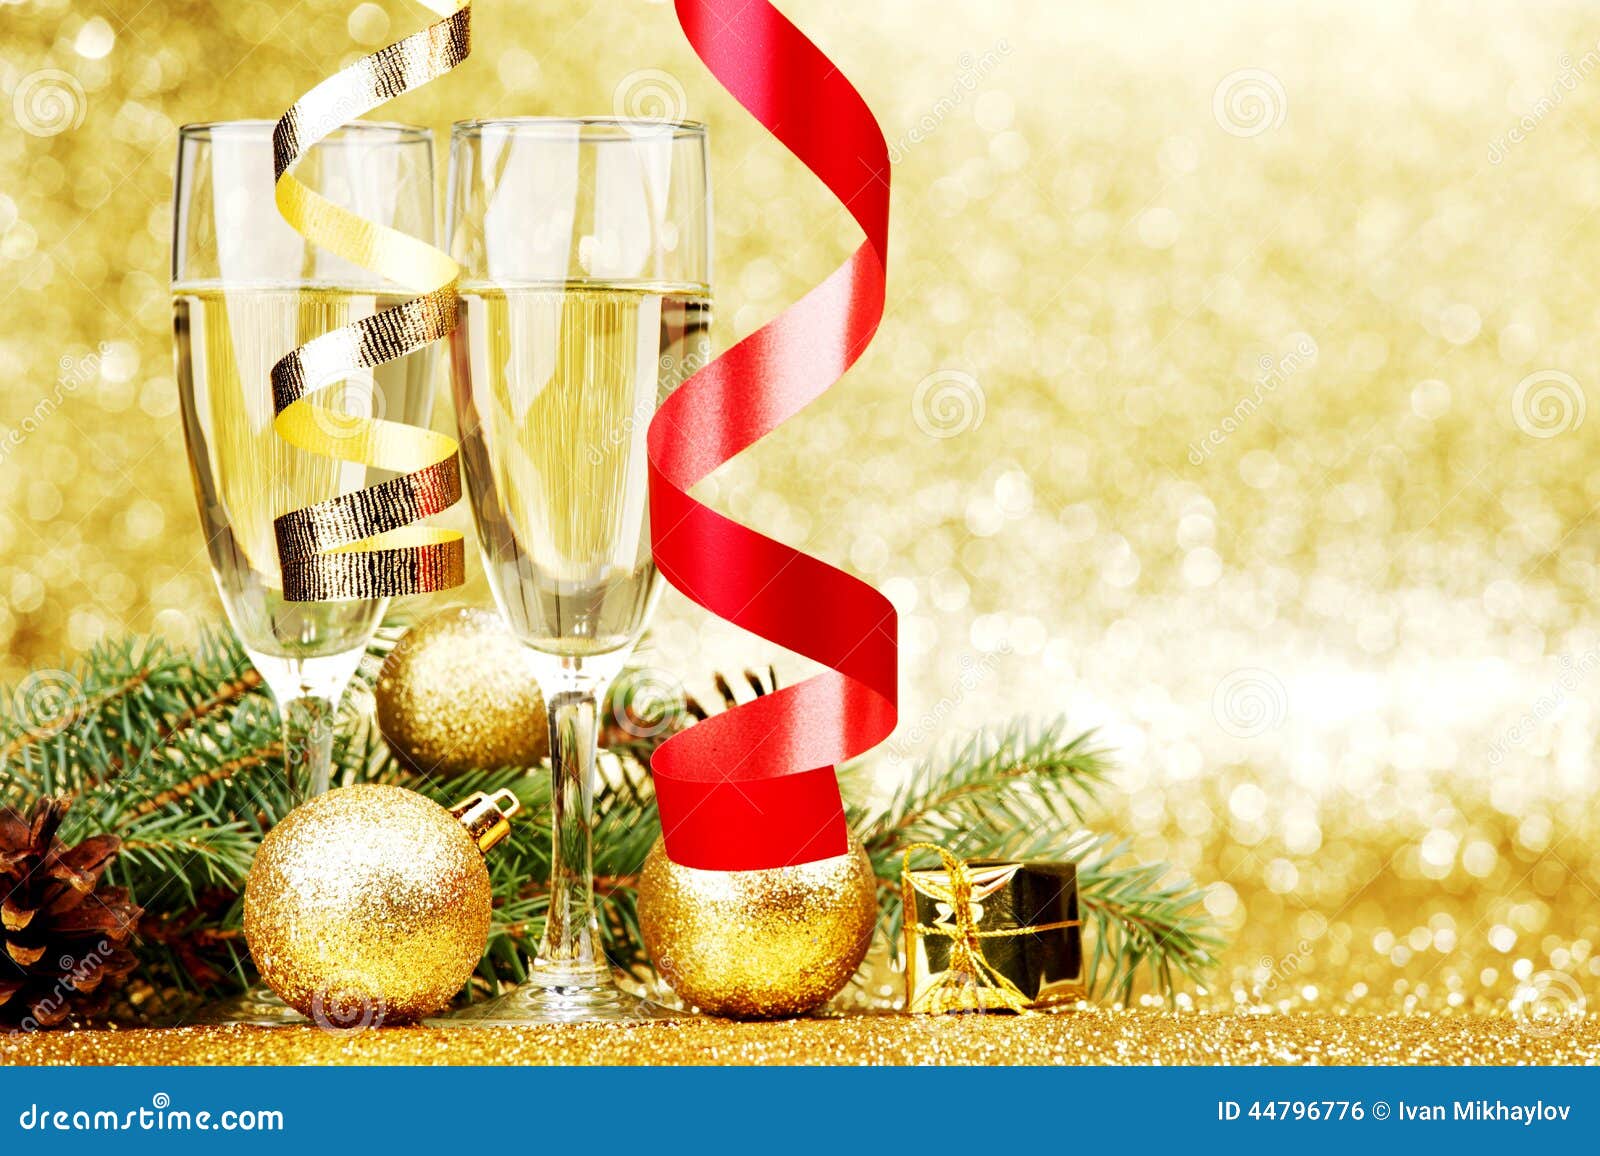 Champagne and Christmas Decor Stock Photo - Image of sparkling, party ...